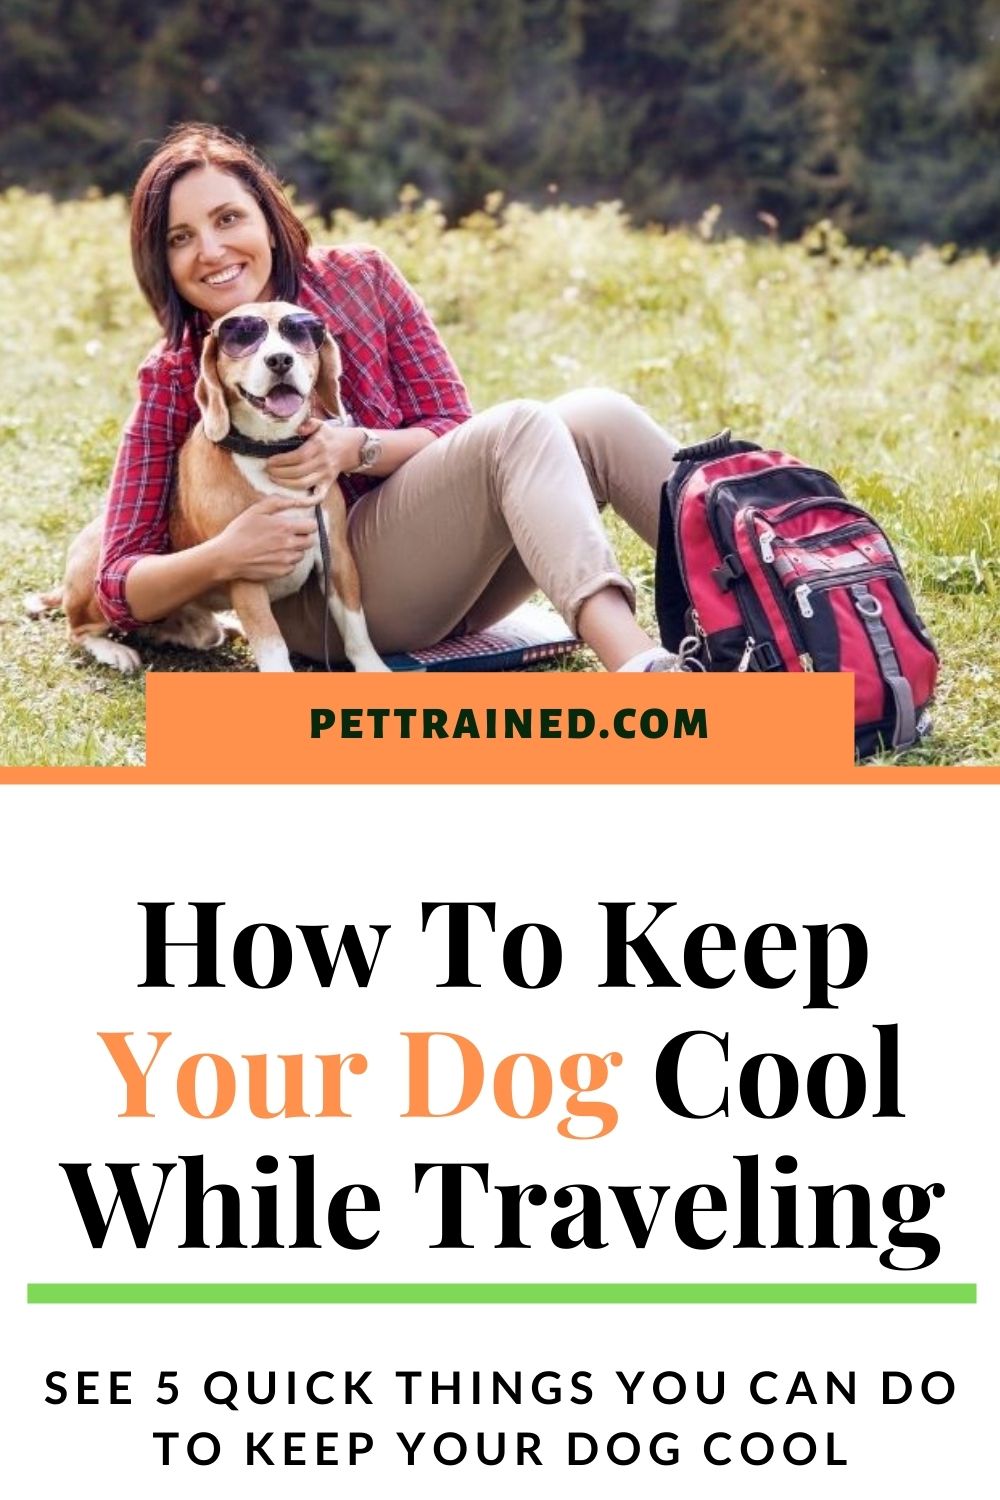 How to keep a dog cool on a trip